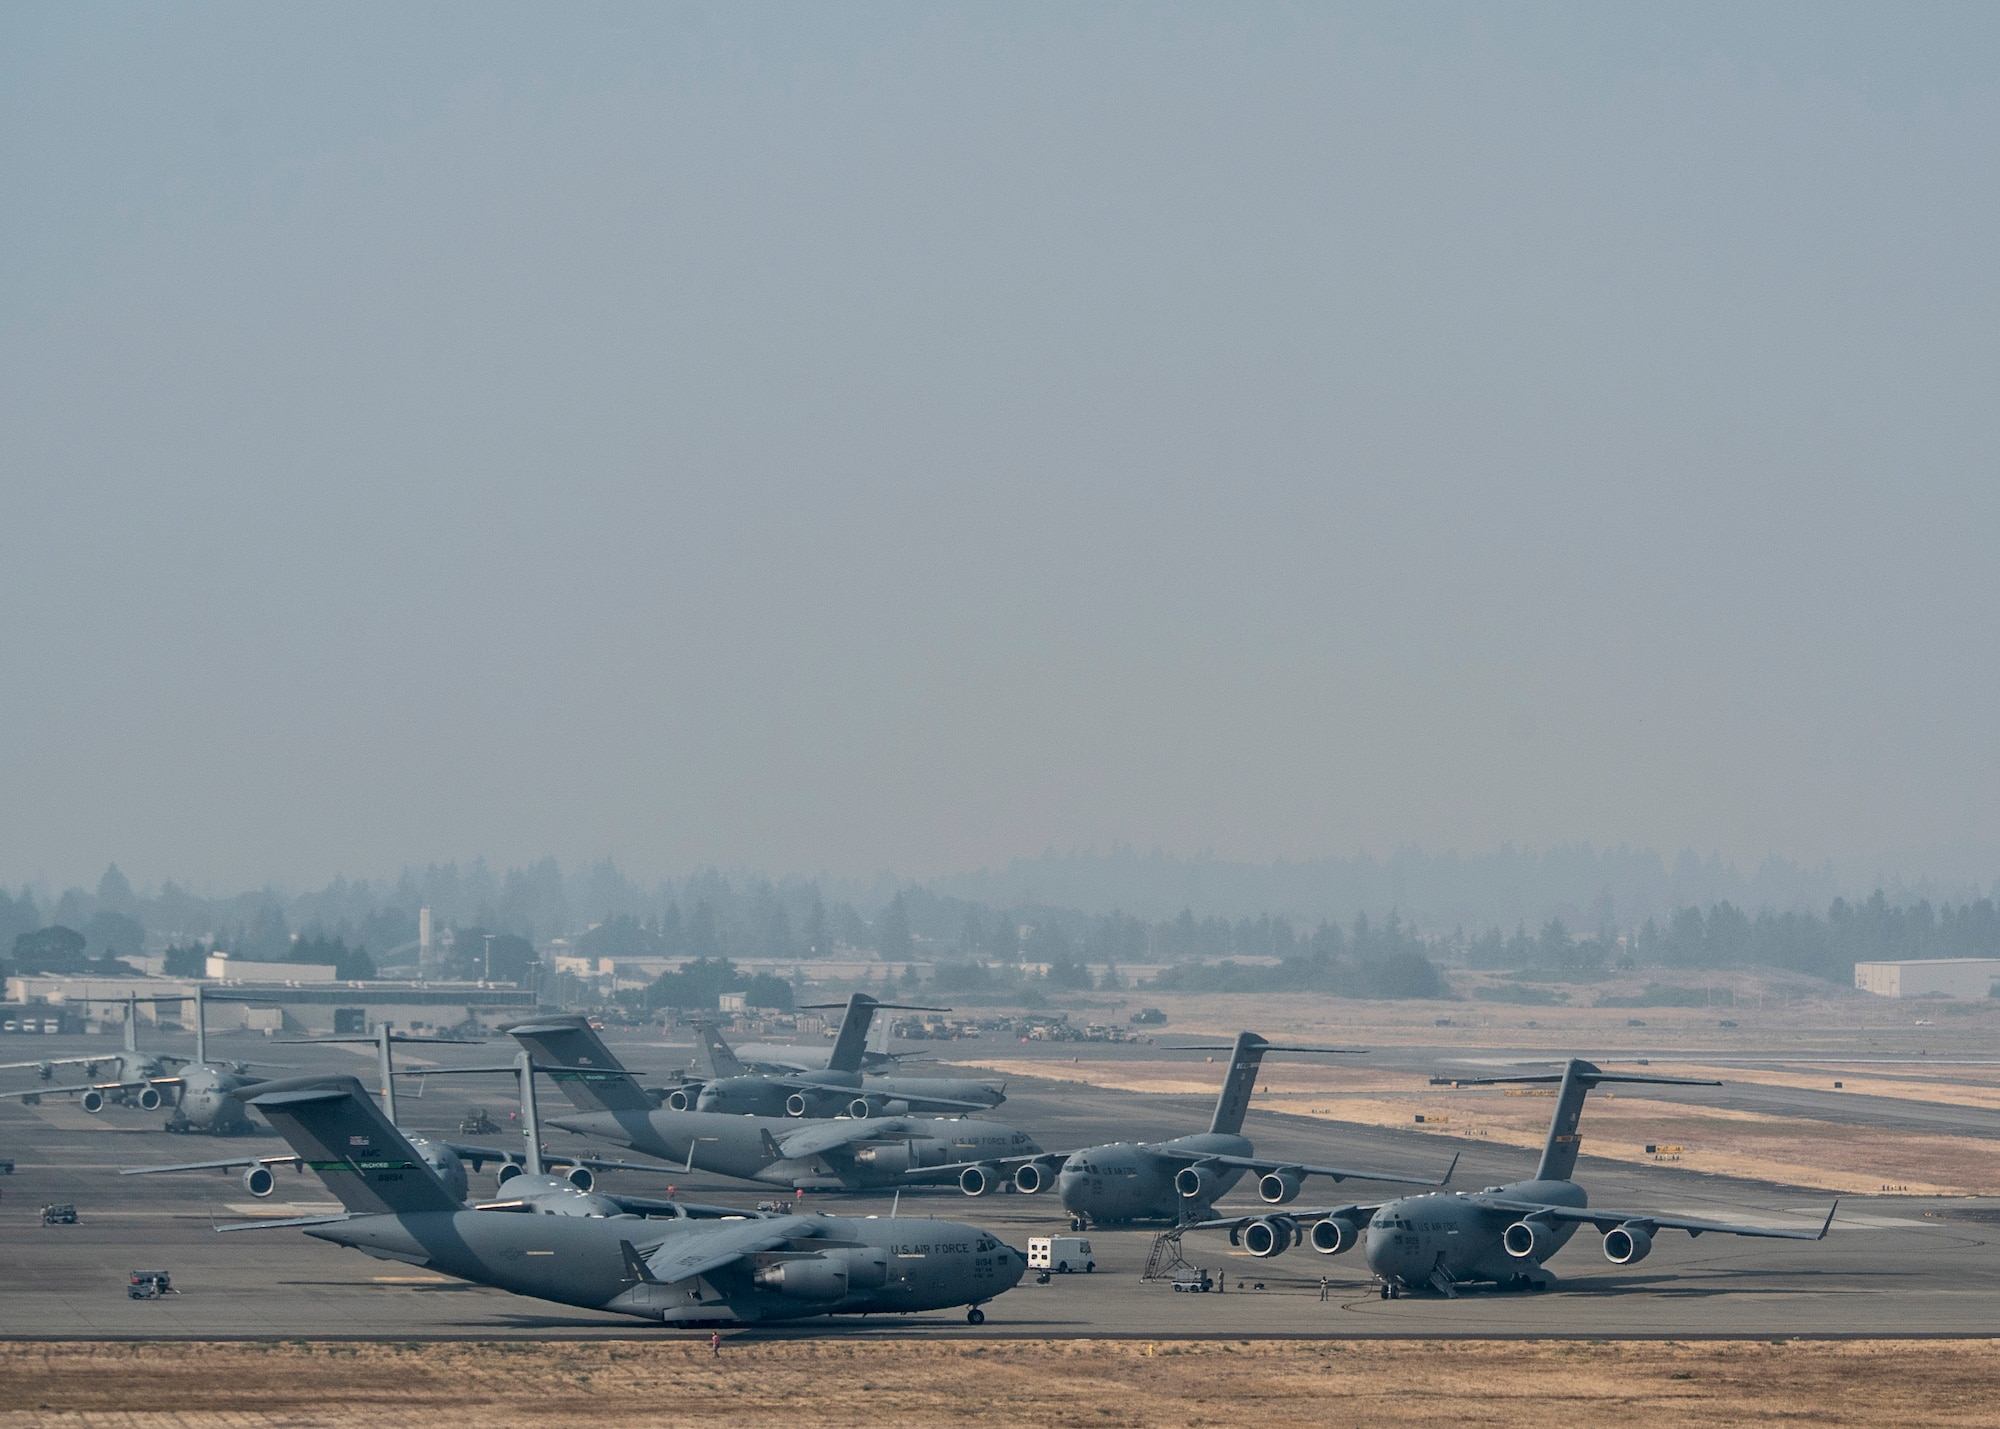 Smoke from the British Columbia, Canada wildfires, which has resulted in a burn ban for the Tacoma area, blankets the Joint Base Lewis-McChord flightline, Aug. 2,2017. The multiple fires have created pollution and visibility concerns for those participating in Mobility Guardian. More than 3,000 Airmen, Soldiers, Sailors, Marines and international partners converged on the state of Washington in support of Mobility Guardian. The exercise is intended to test the abilities of the Mobility Air Forces to execute rapid global mobility missions in dynamic, contested environments. Mobility Guardian is Air Mobility Command's premier exercise, providing an opportunity for the Mobility Air Forces to train with joint and international partners in airlift, air refueling, aeromedical evacuation and mobility support. The exercise is designed to sharpen Airmen’s skills in support of combatant commander requirements. (U.S. Air Force photo by Tech. Sgt. Jodi Martinez)